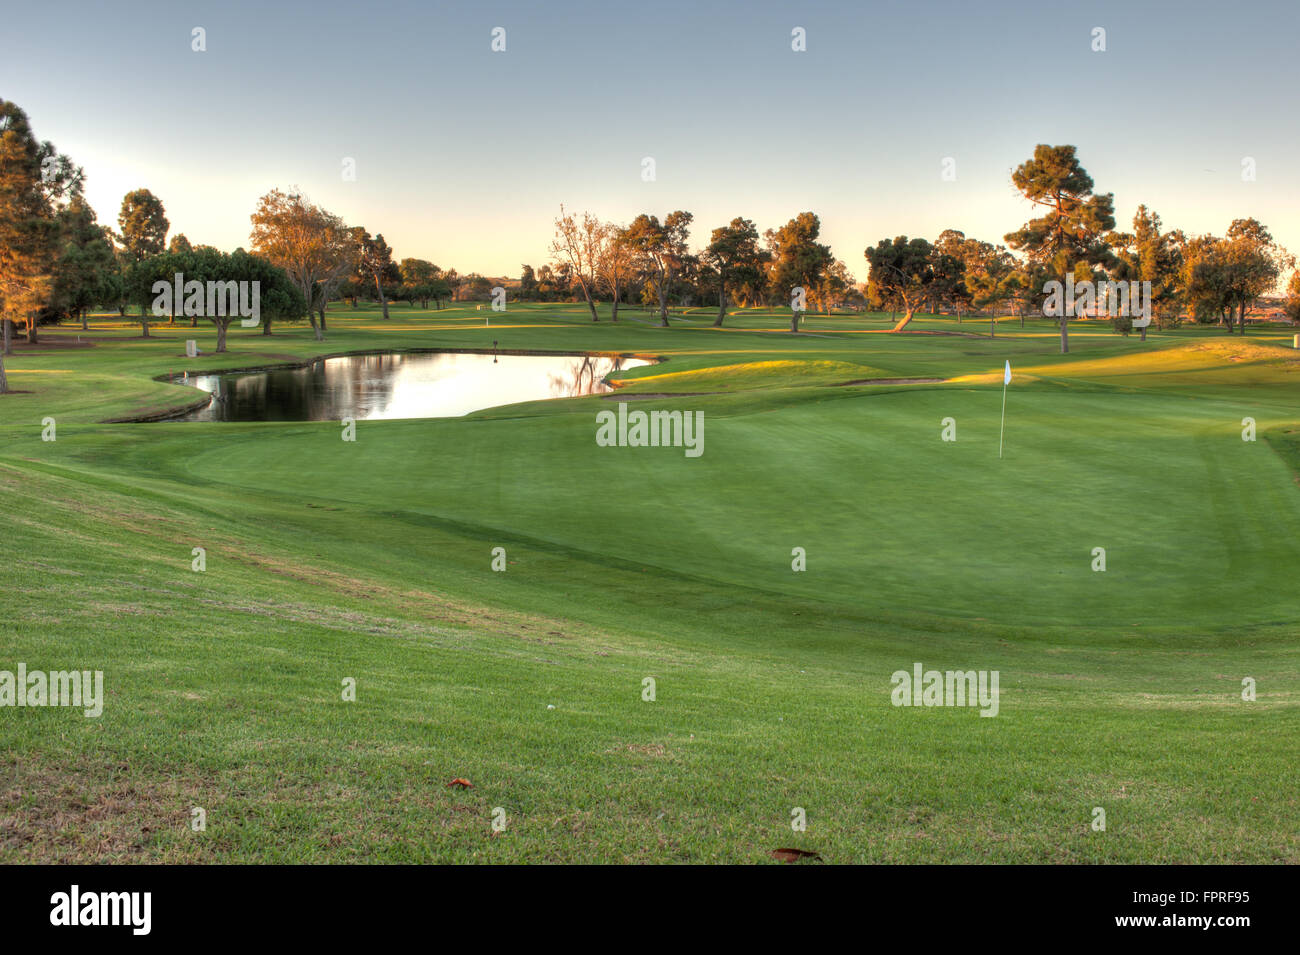 Pin placement on the 18th green Stock Photo